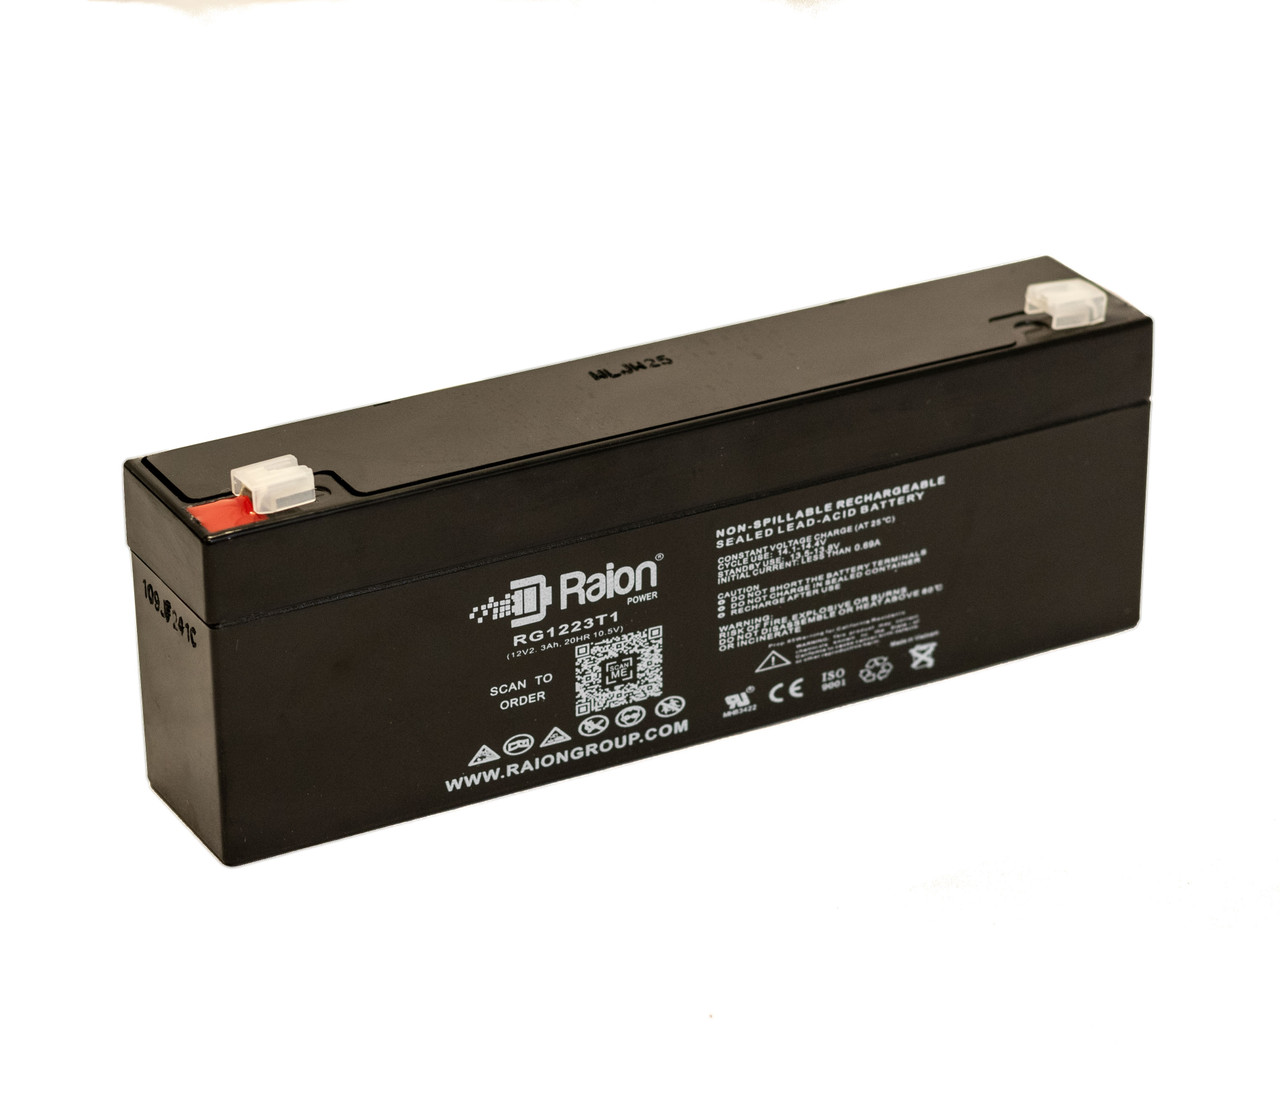 Raion Power RG1223T1 Replacement Battery for Spacelabs Medical 1 PC Display